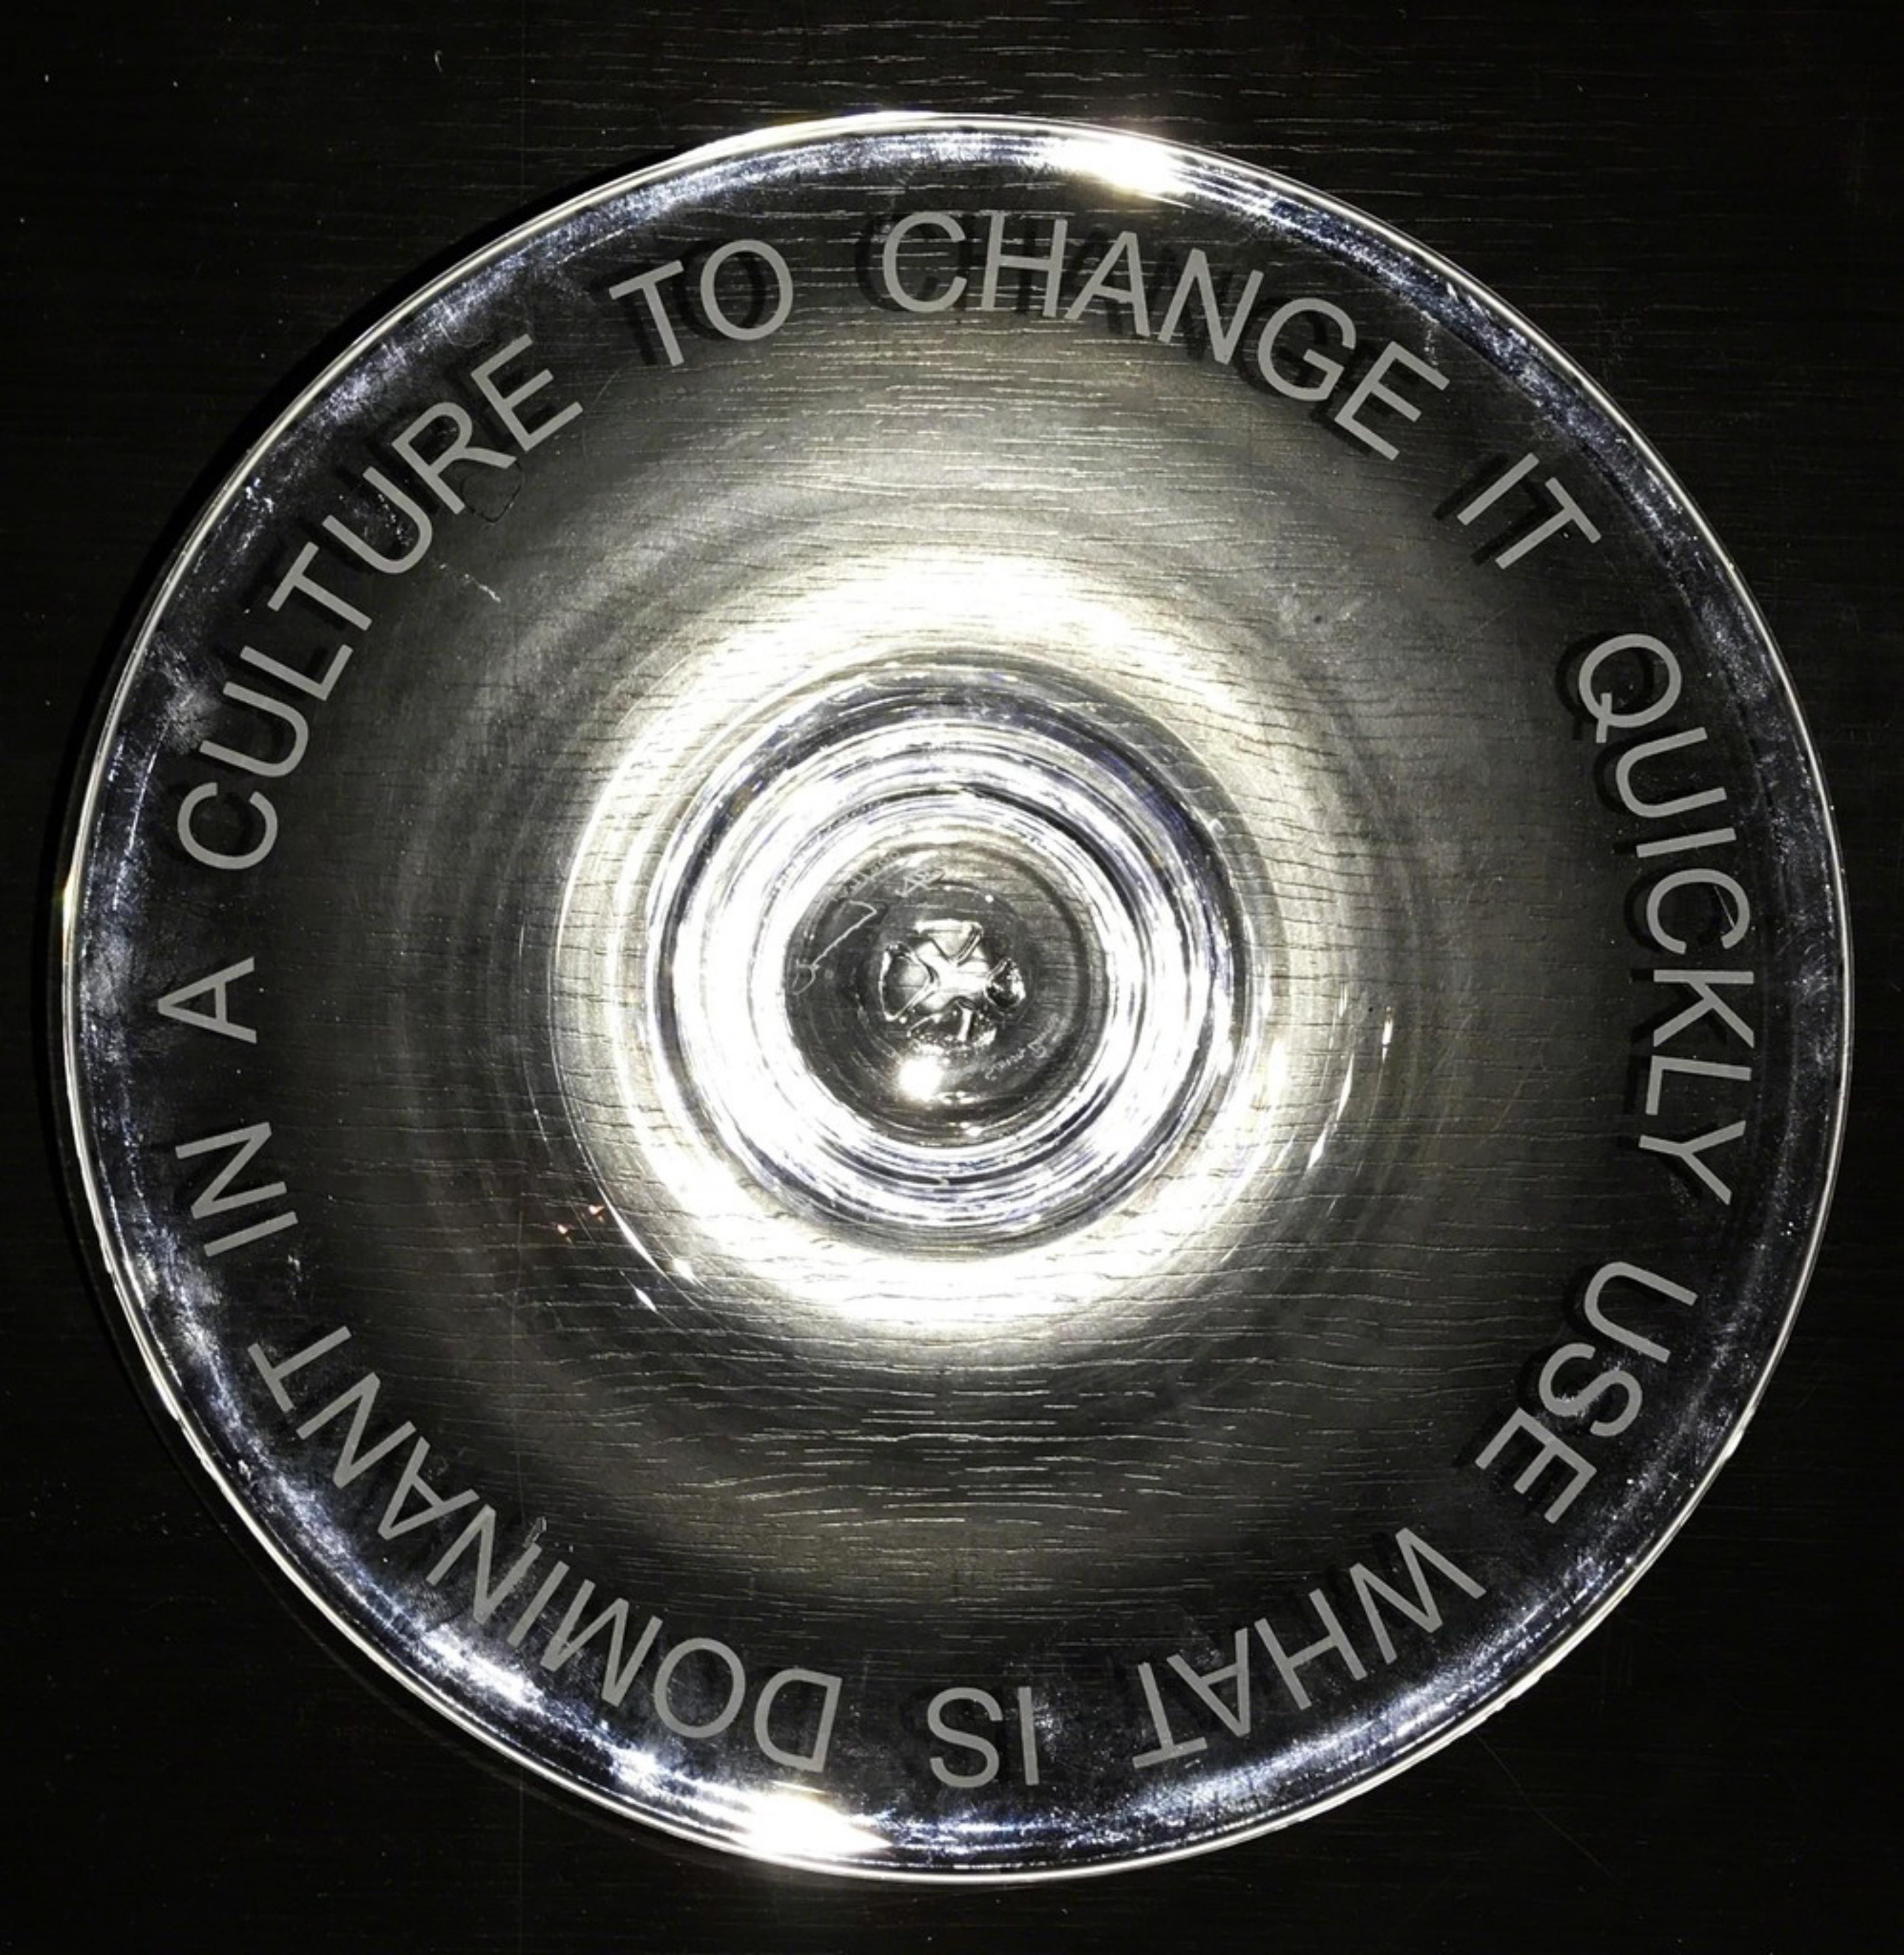 USE WHAT IS DOMINANT IN A CULTURE TO CHANGE IT: Signed glass bowl Whitney Museum - Sculpture by Jenny Holzer